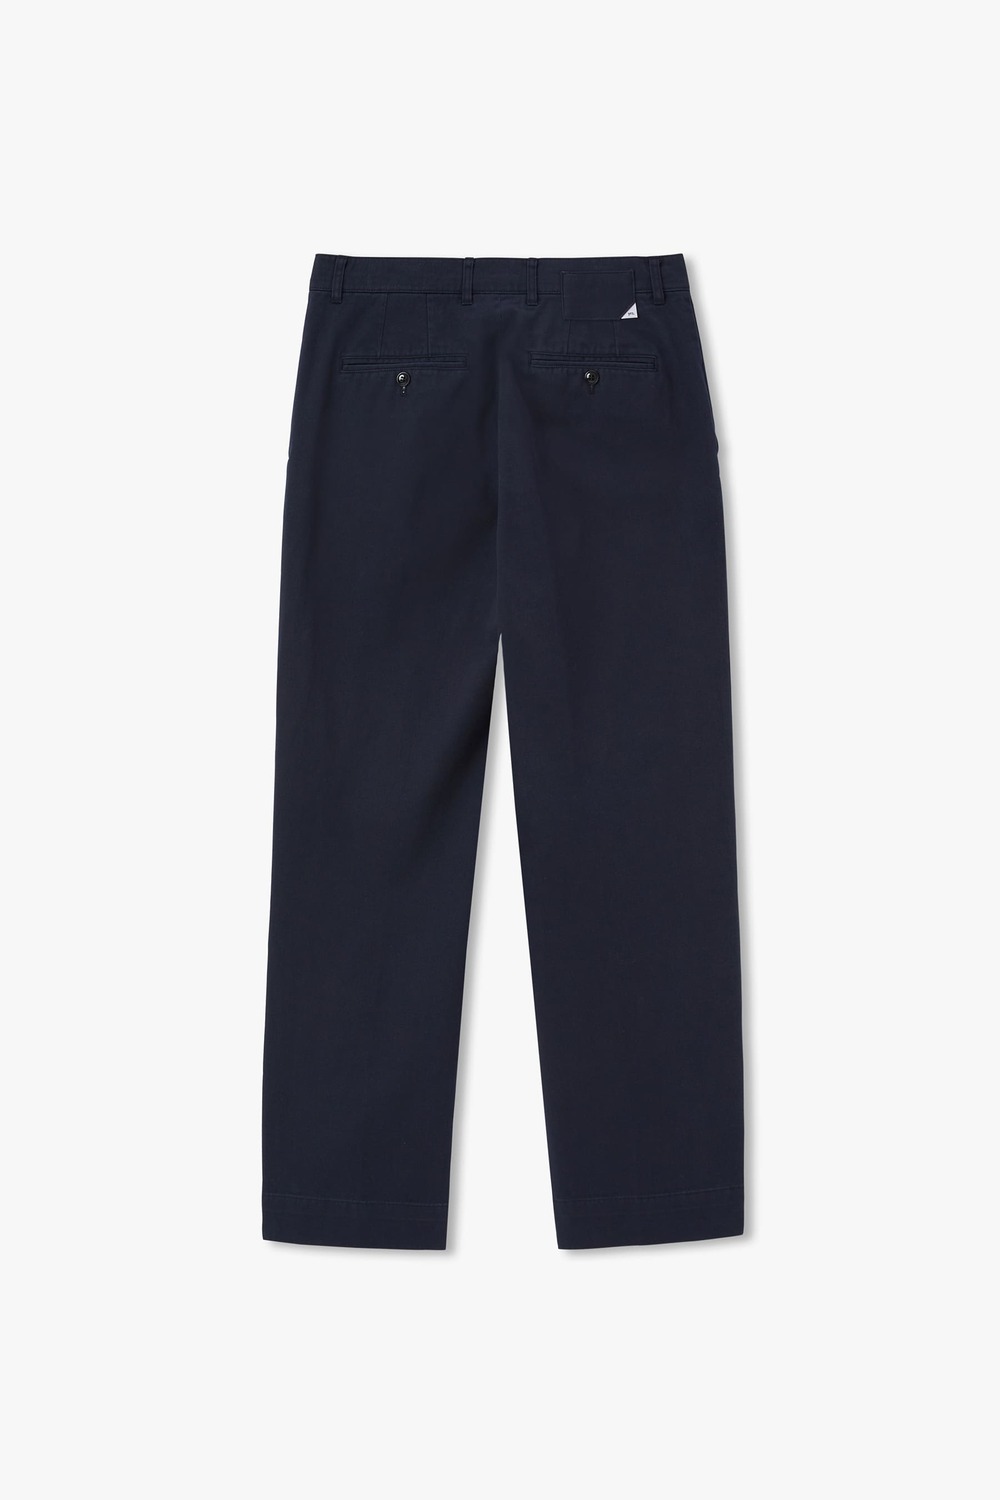 WASHED NAVY R-801 STRAIGHT COTTON DRILL WASHED CHINO PANTS (ECP GARMENT PROCESS)